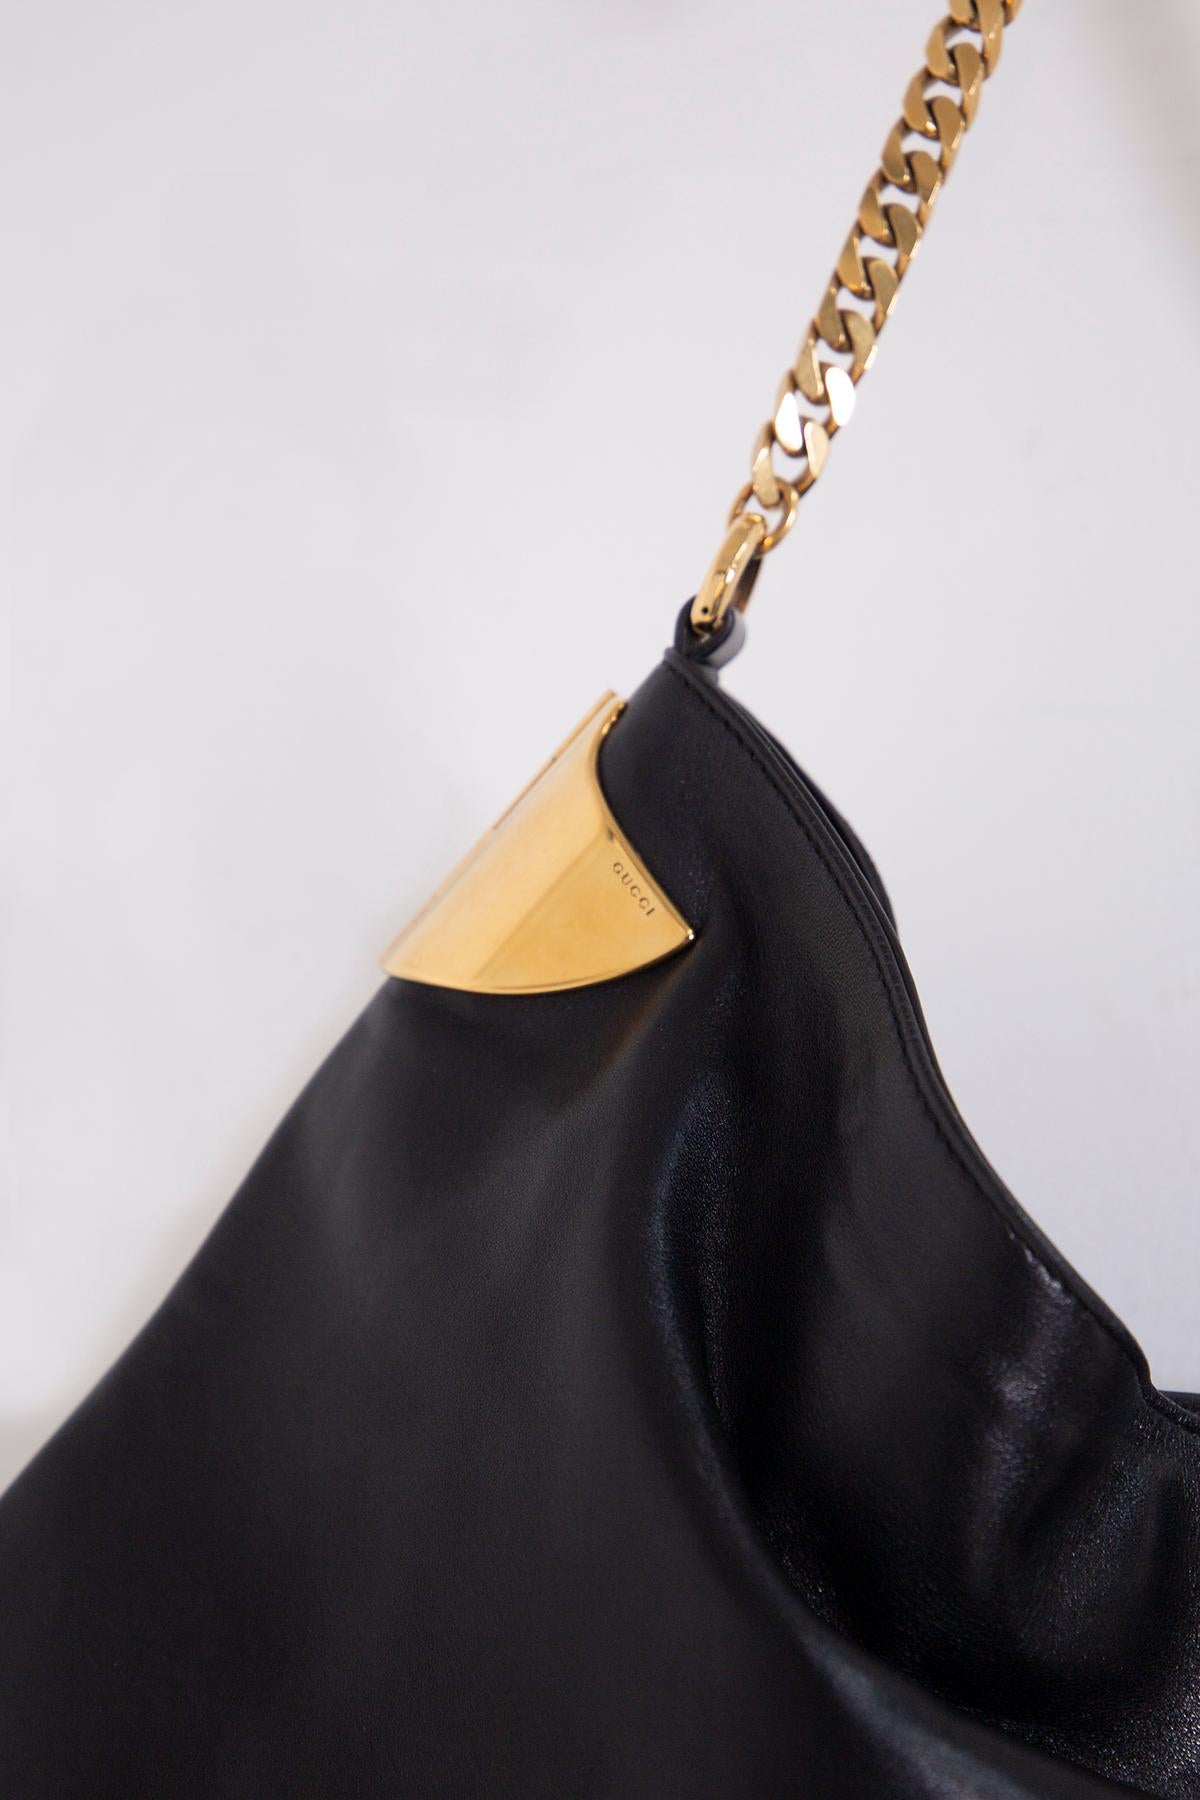 Original and wonderful Gucci shoulder bag from the 1970 collection, made of very soft black leather, embellished with inserts, such as two plates on the sides, a chain shoulder strap and a tassel, in gold metal. On the chain there is a leather